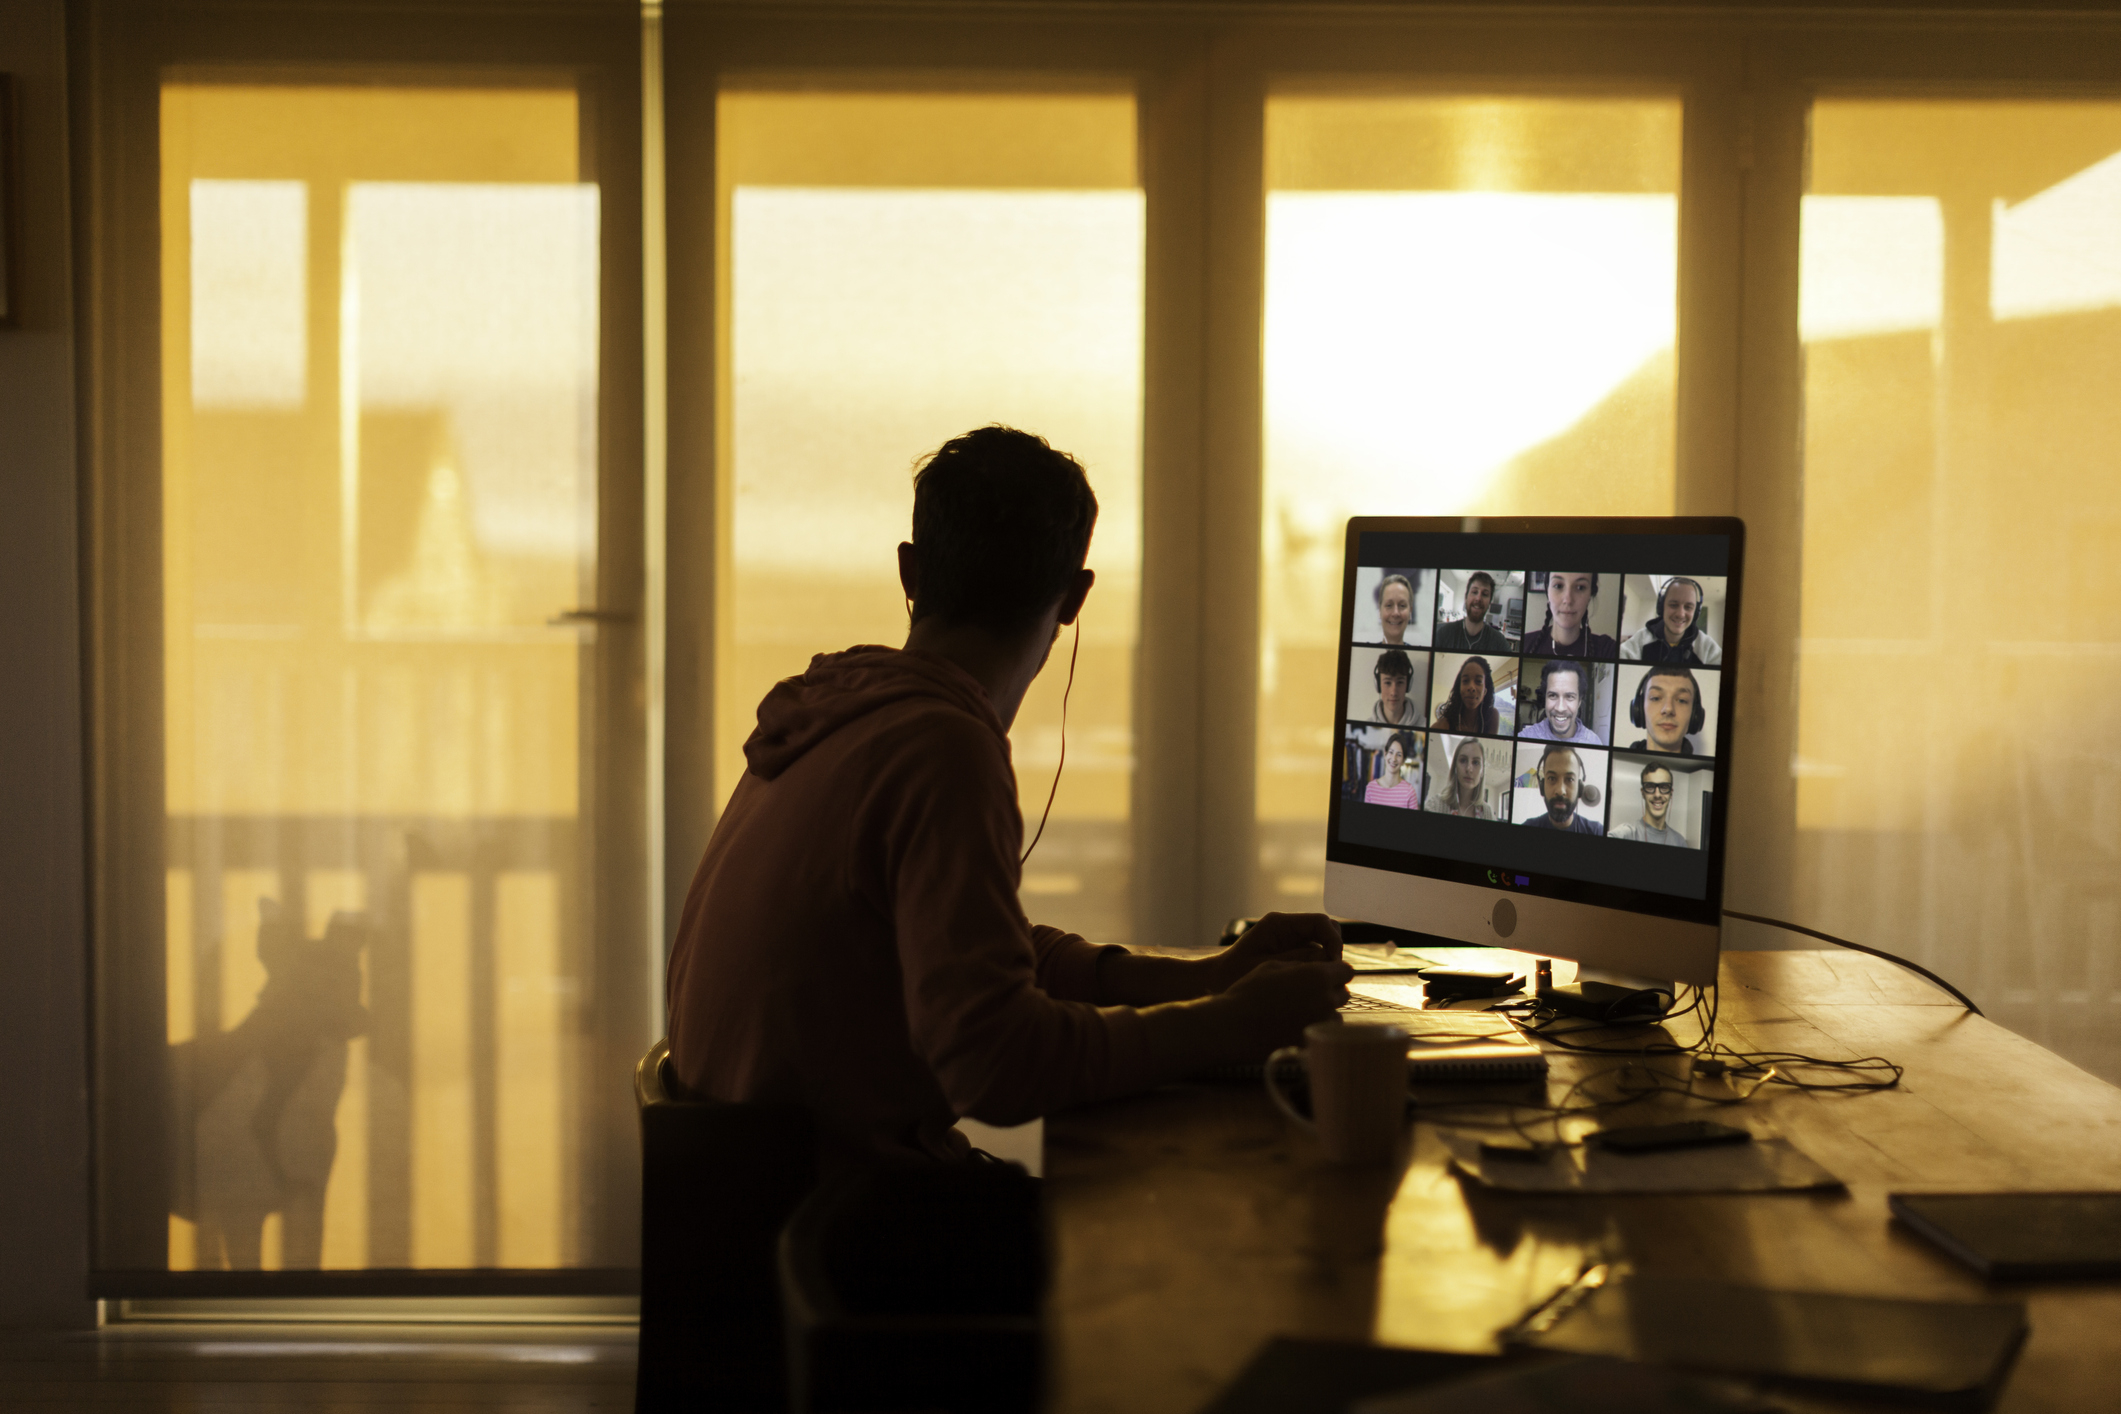 A teen on a video conference looks outside at a sunny window